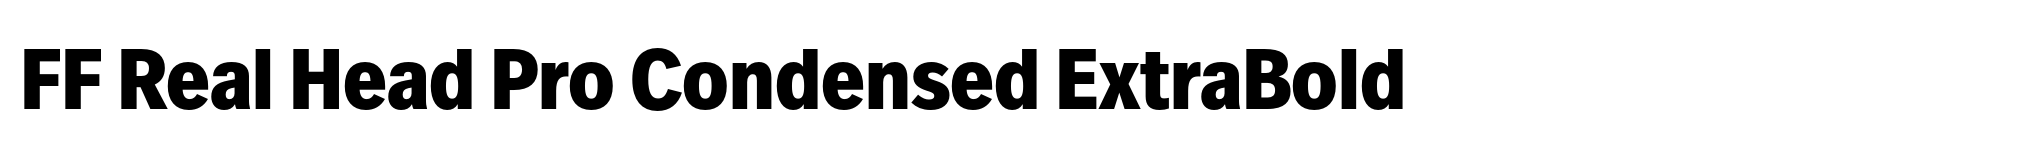 FF Real Head Pro Condensed ExtraBold image